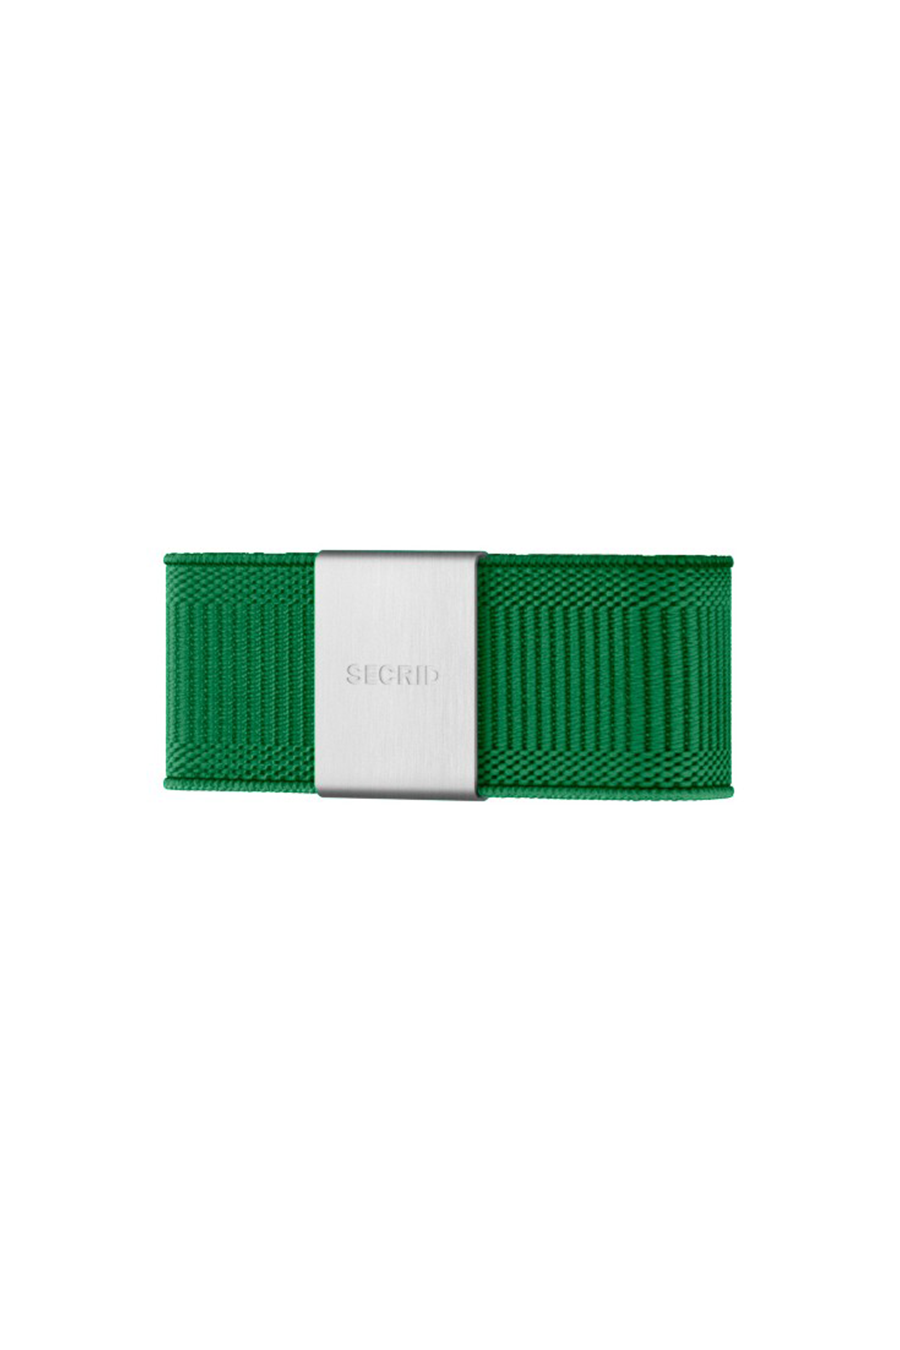 Moneyband | Green - Main Image Number 1 of 1